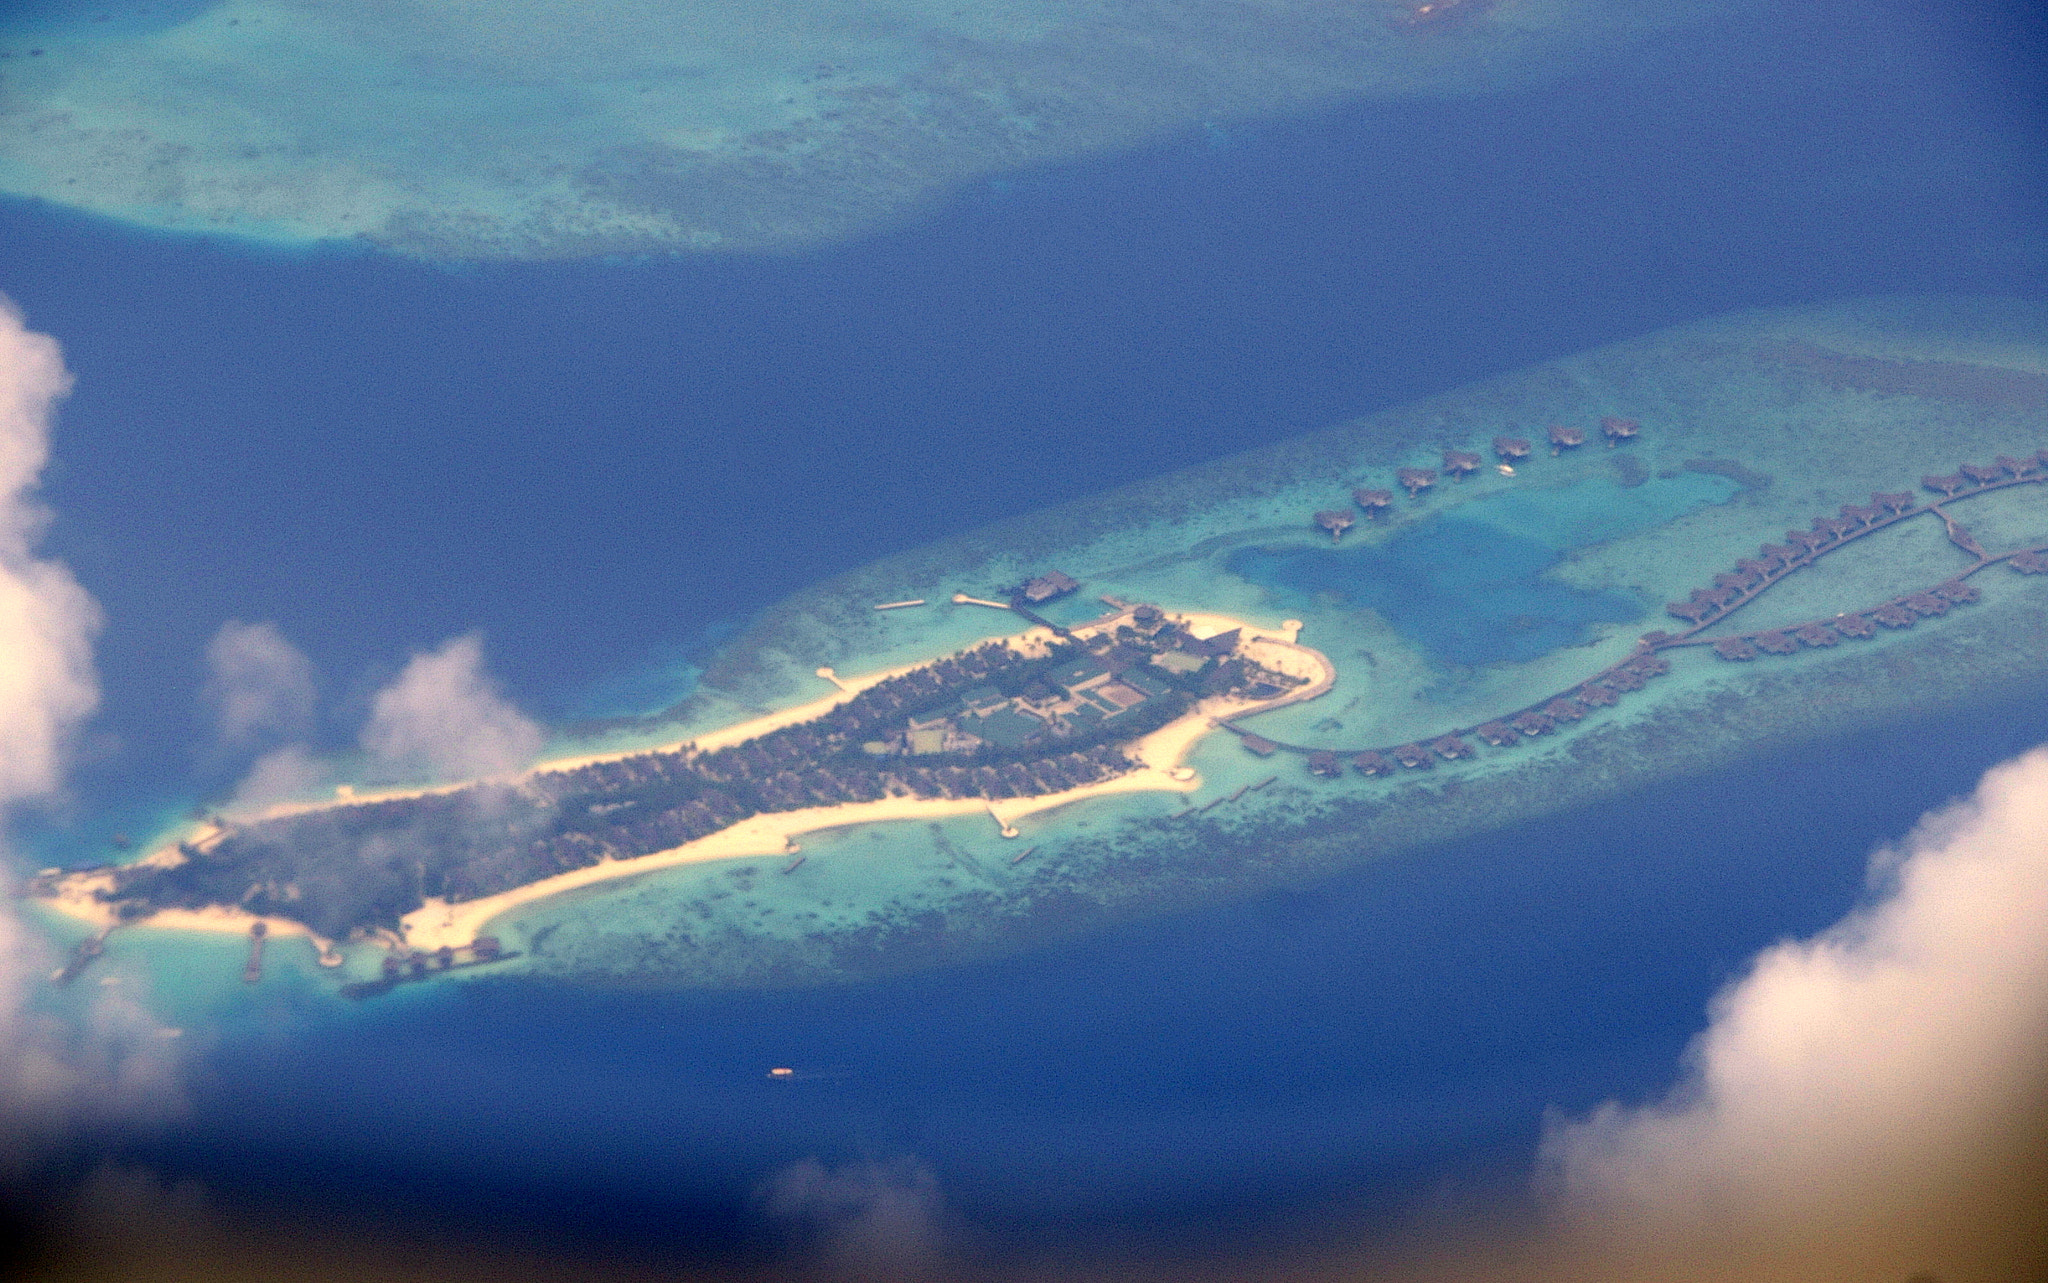 Pentax *ist DS sample photo. Somewhere over the maldives reefs photography